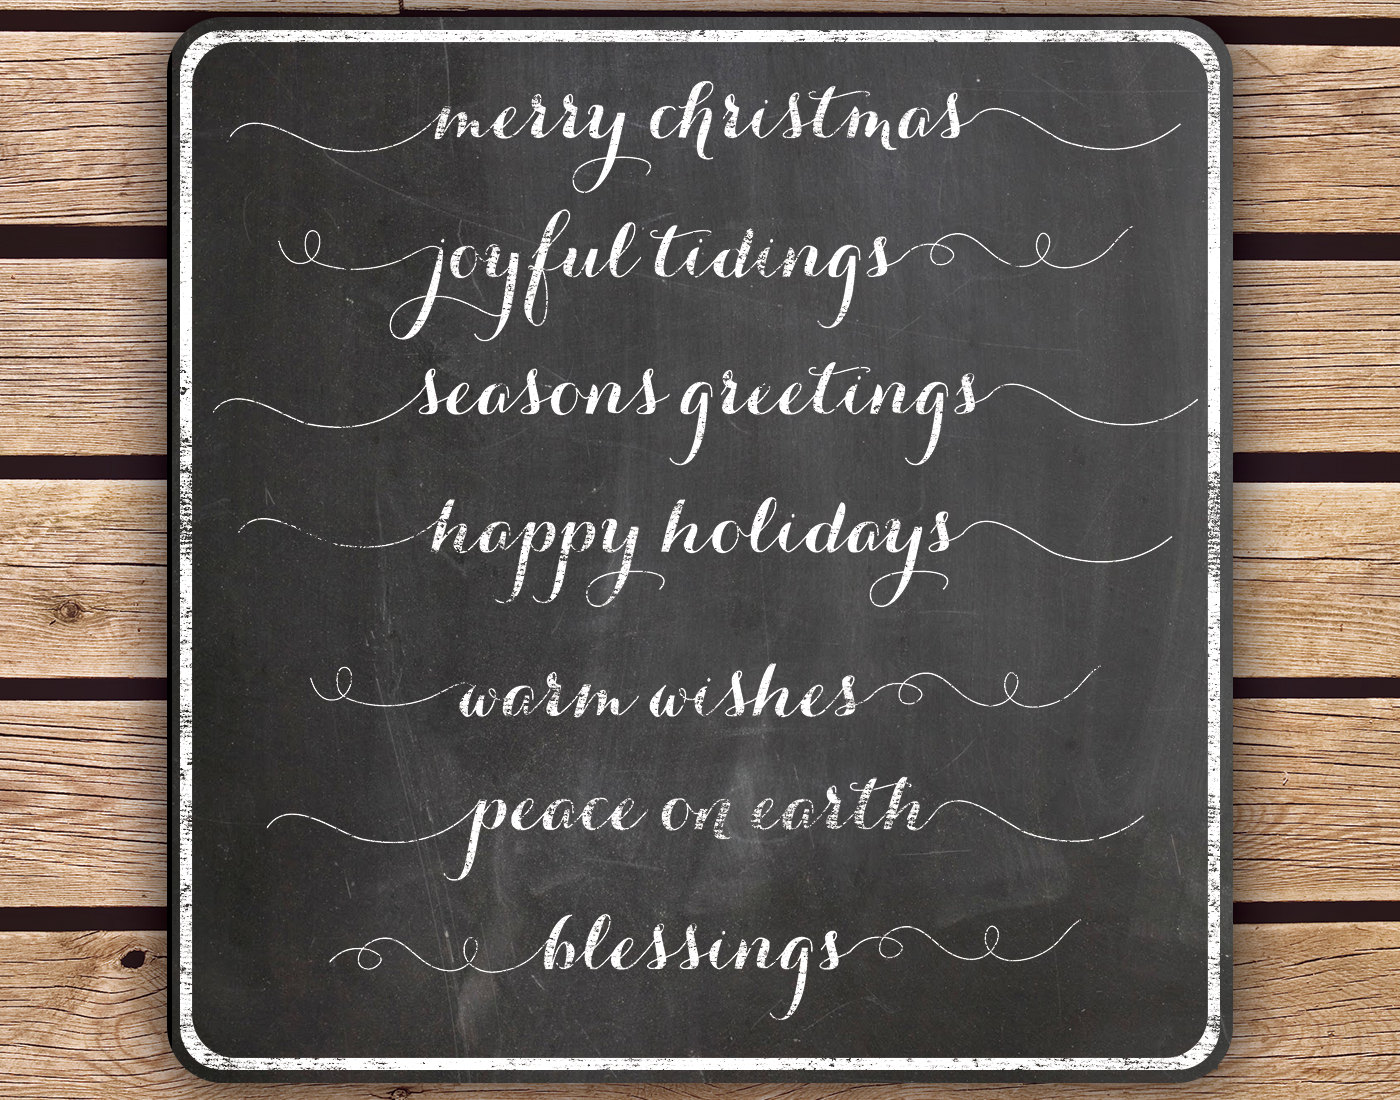 Clipart   Calligraphy Christmas Chalkboard Greetings   Instant